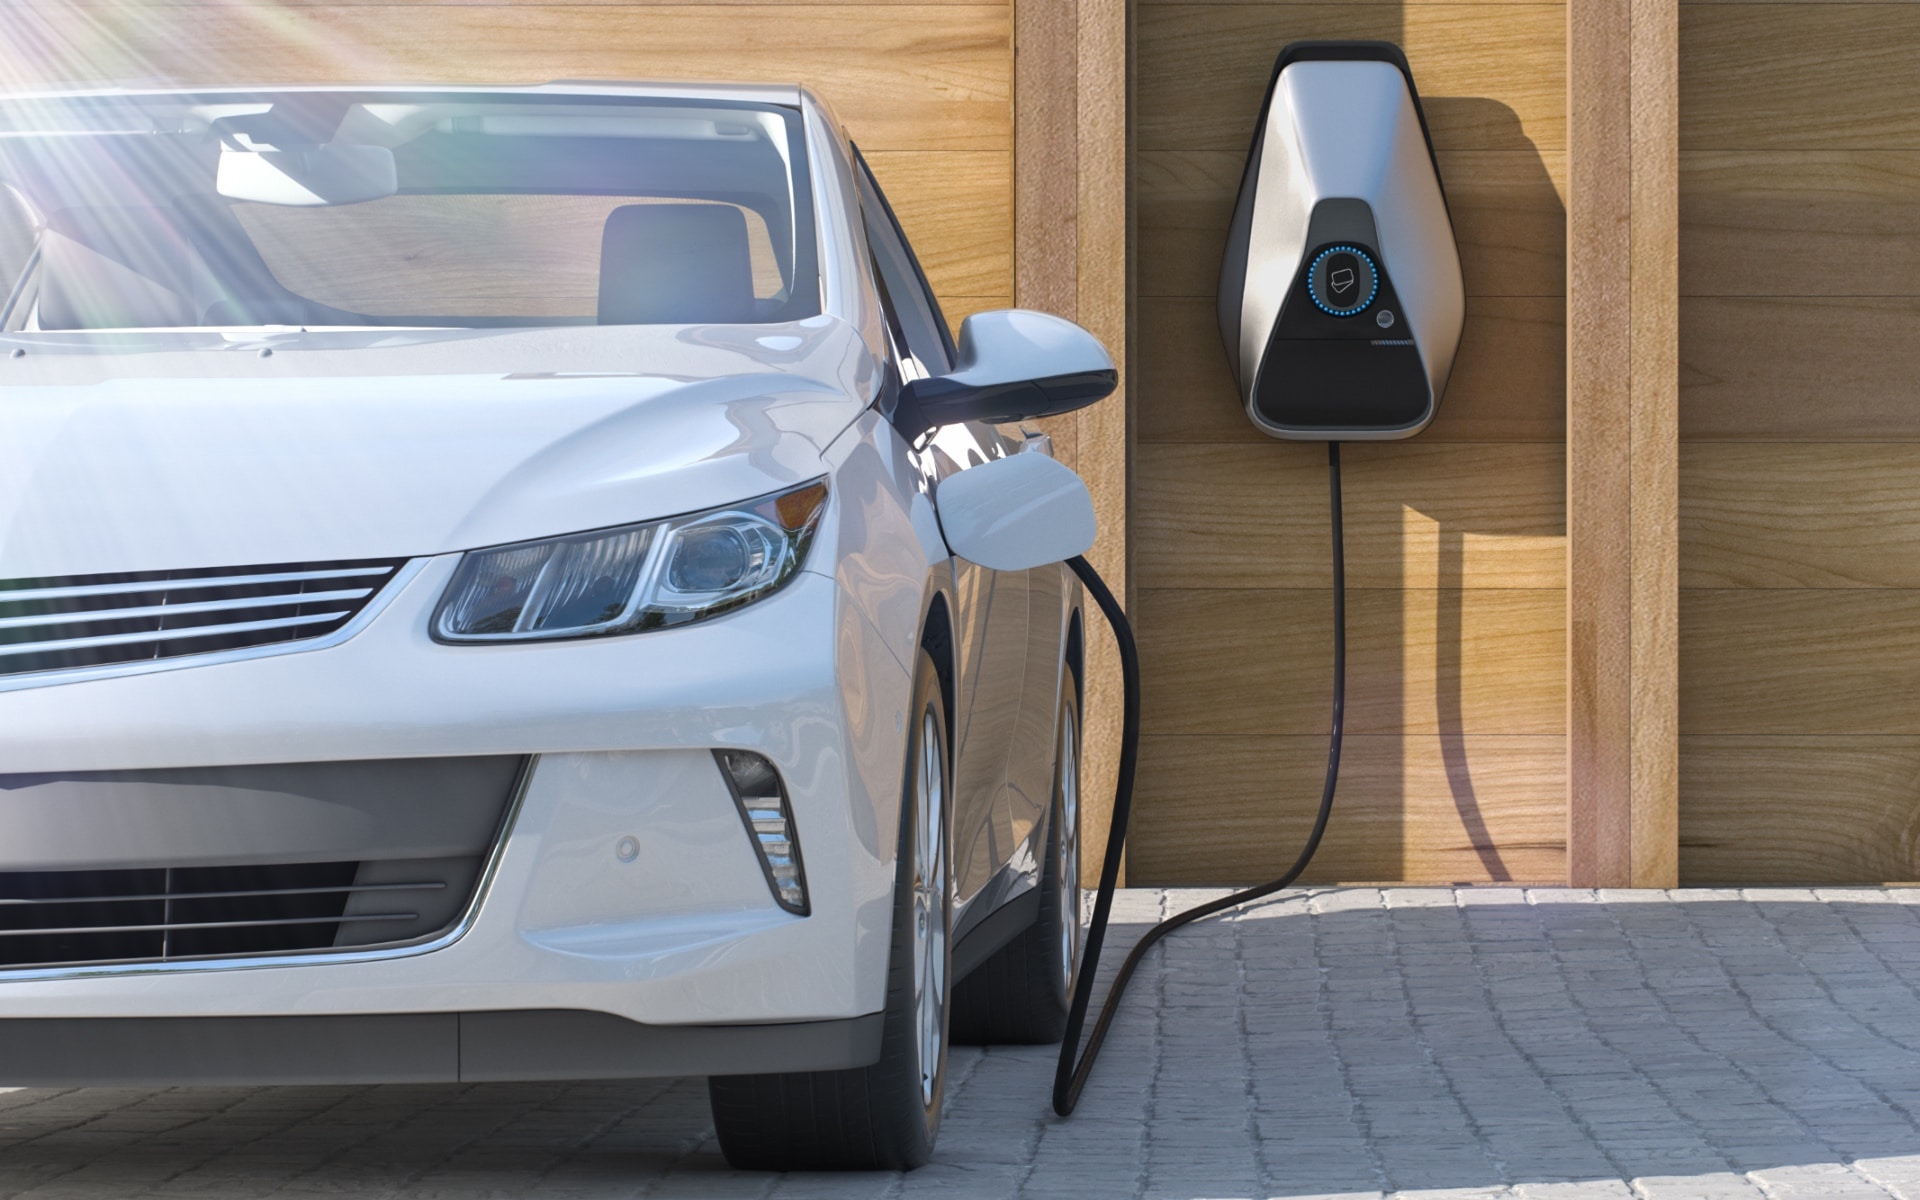 Key Considerations When Installing an EV Charger